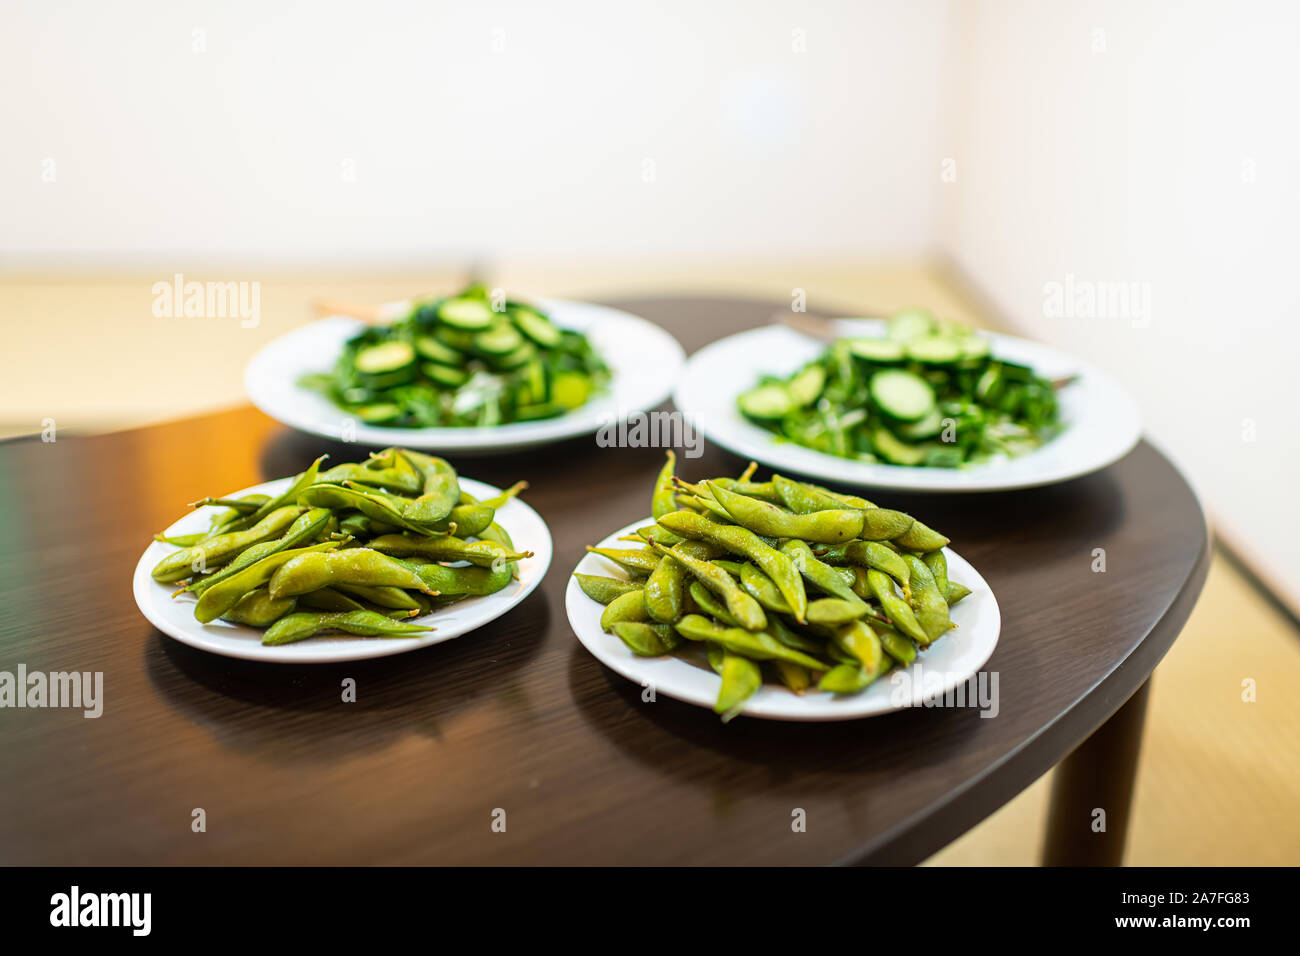 Traditional home room with wooden table and green salad dish with Japanese cucumbers and mizuna greens and boiled edamame soy beans Stock Photo